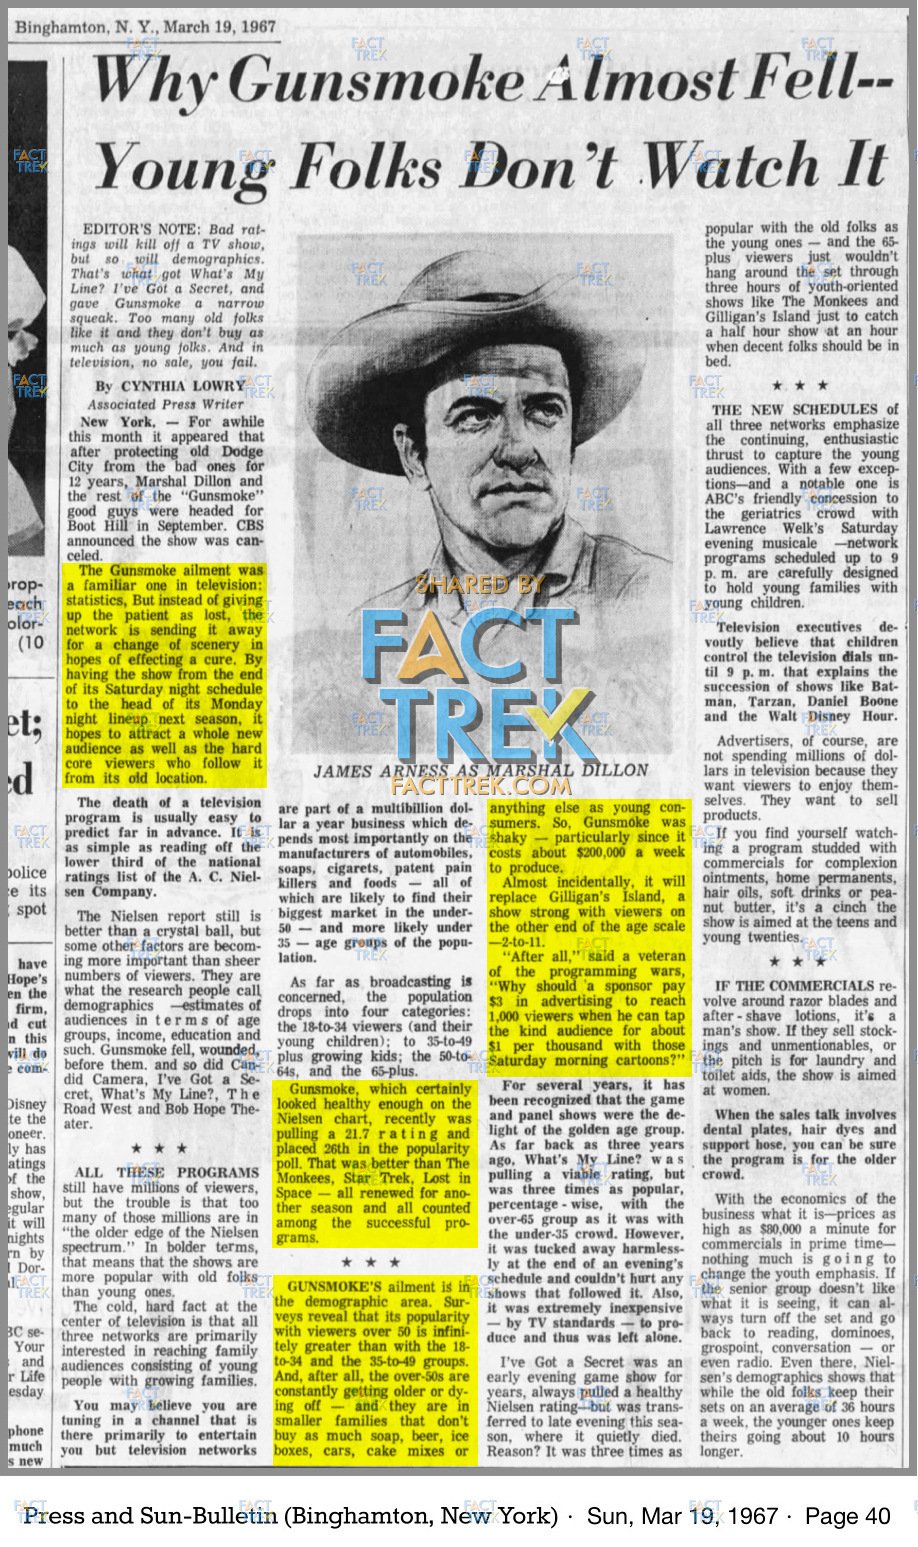 1967-03-17 Why Gunsmoke Almost Fell—Young People Don't Watch It, Press and Sun Bulletin, Sun, p40 DEMOGRAPHICS WM.jpg